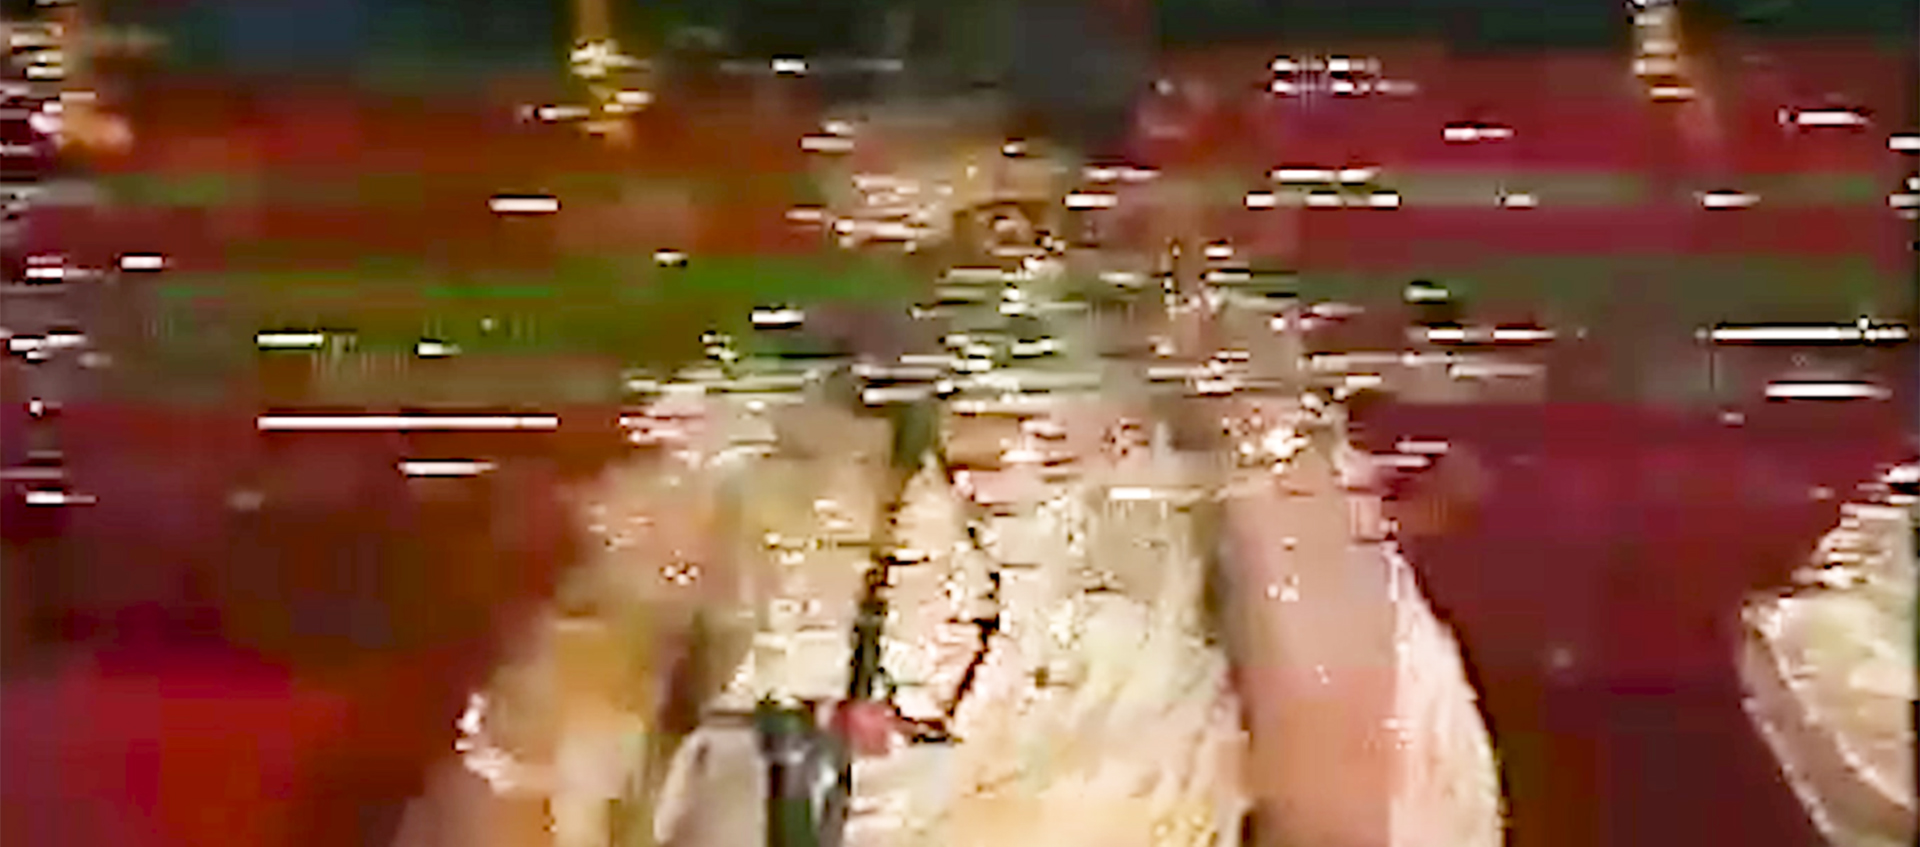 A distorted image from an old video tape shows a partially visible person in white clothing sitting on a red carpet.